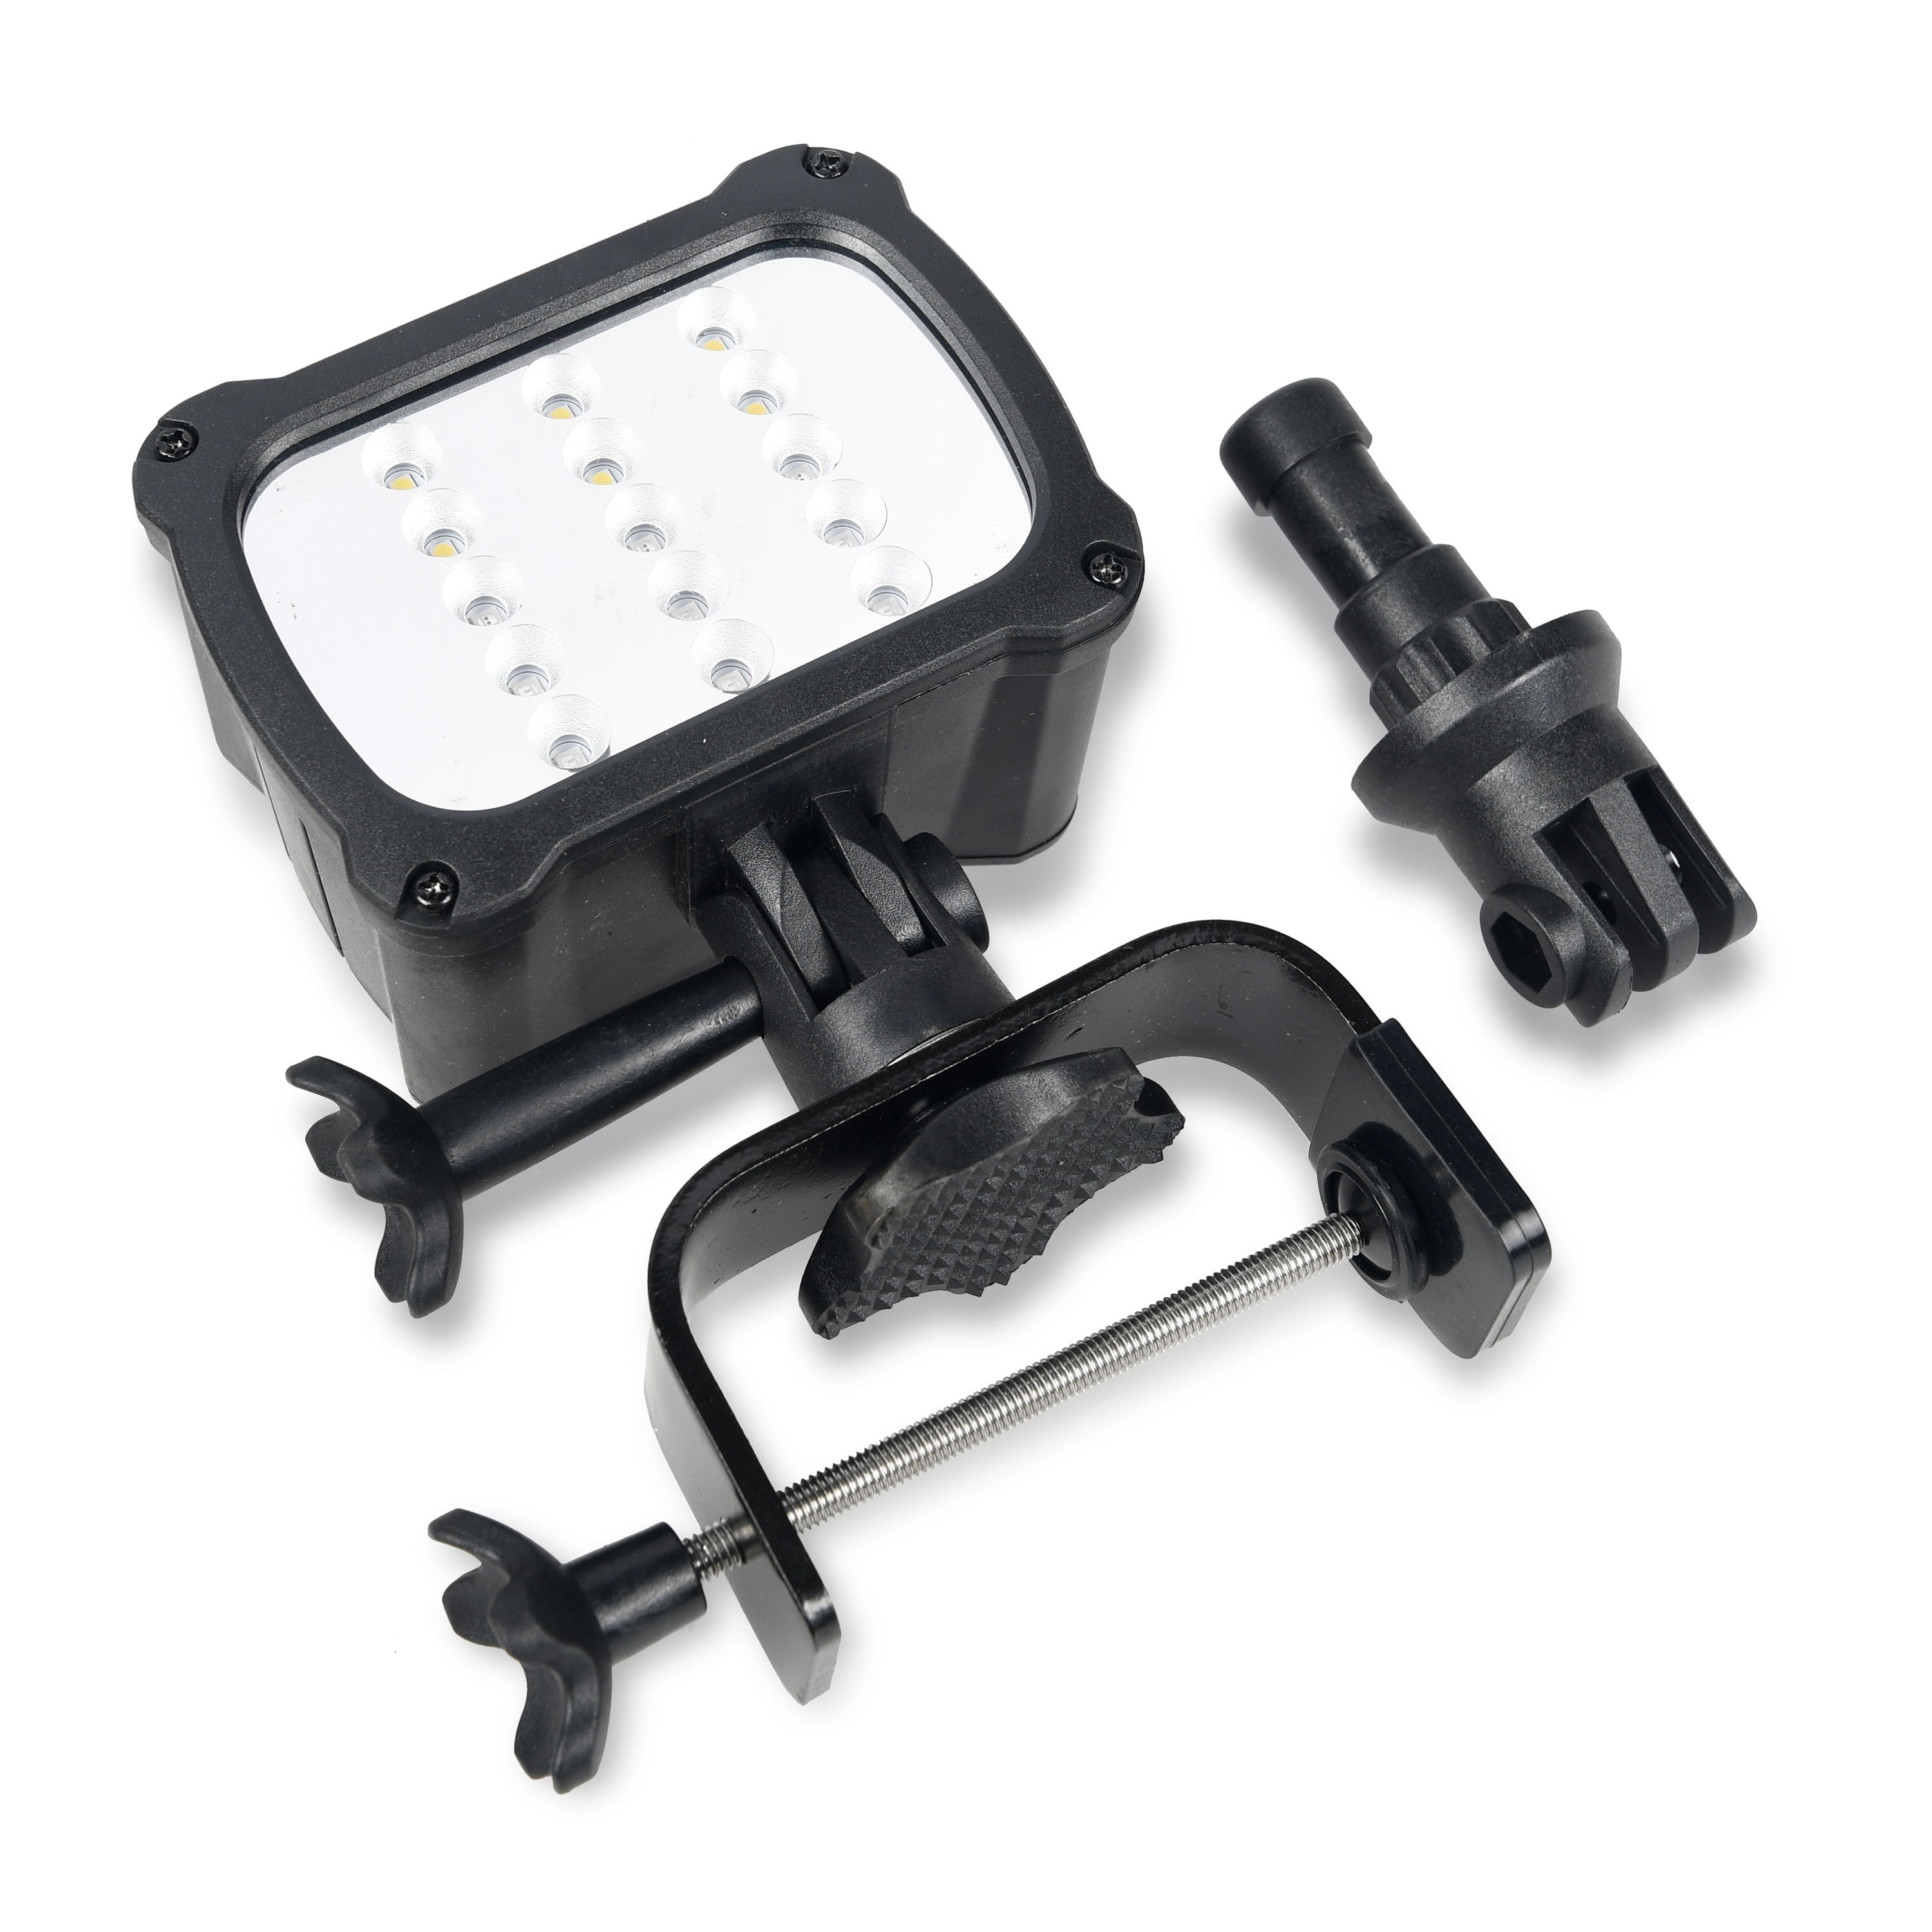 Attwood Multi-function Battery Operated Sport Flood Light for sale online